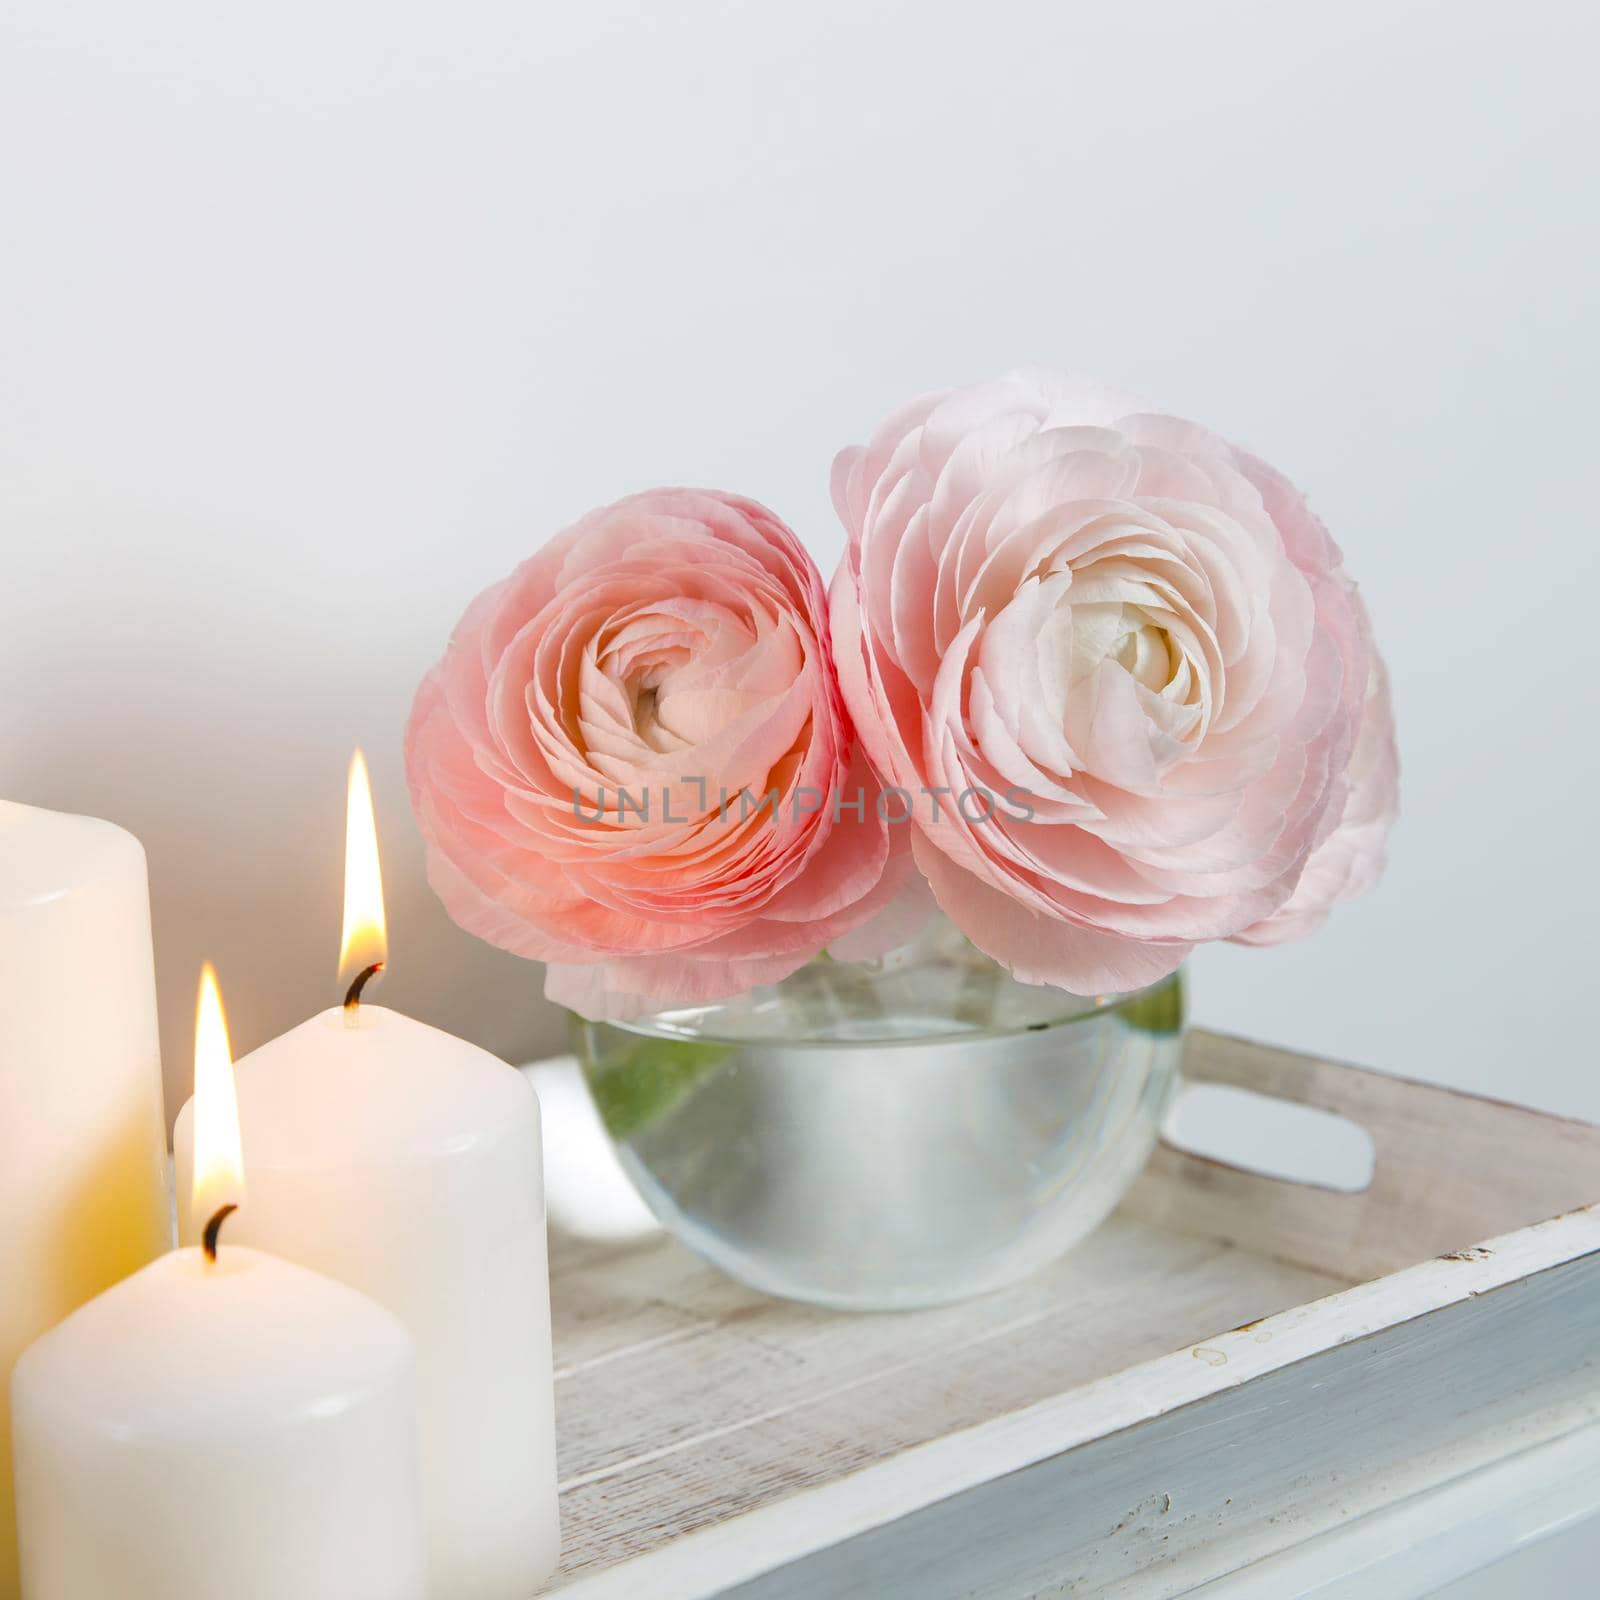 Three pale pink ranunculus in a transparent round vase and candles on the white windowsill. Copy space. Place for text